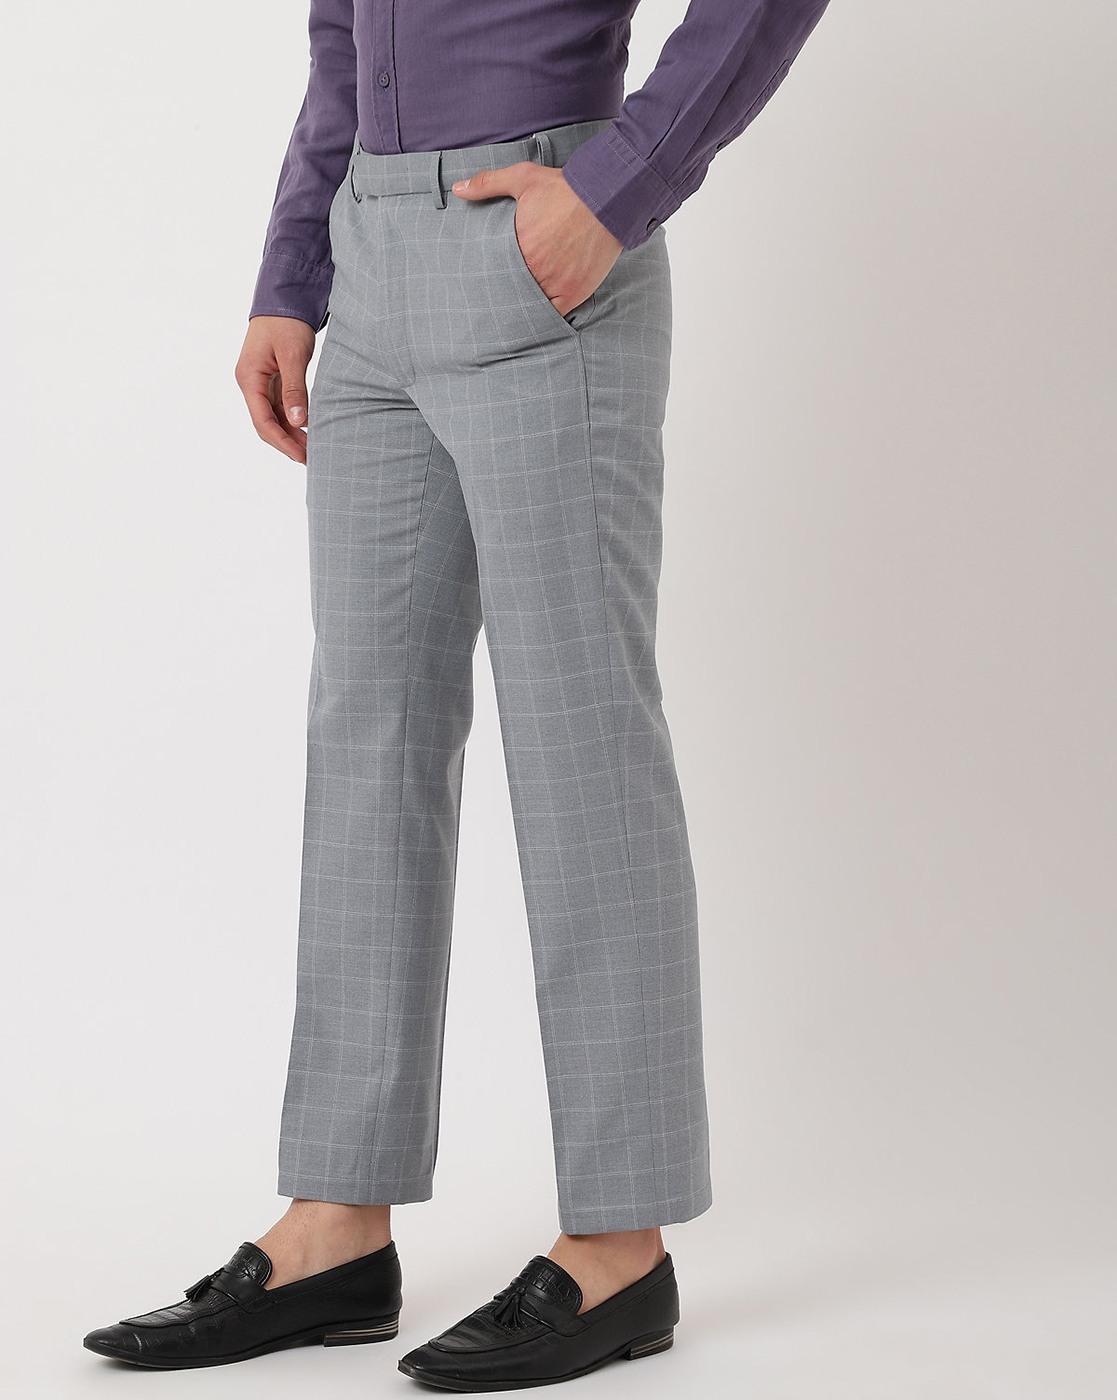 Discover more than 208 checked formal trousers super hot